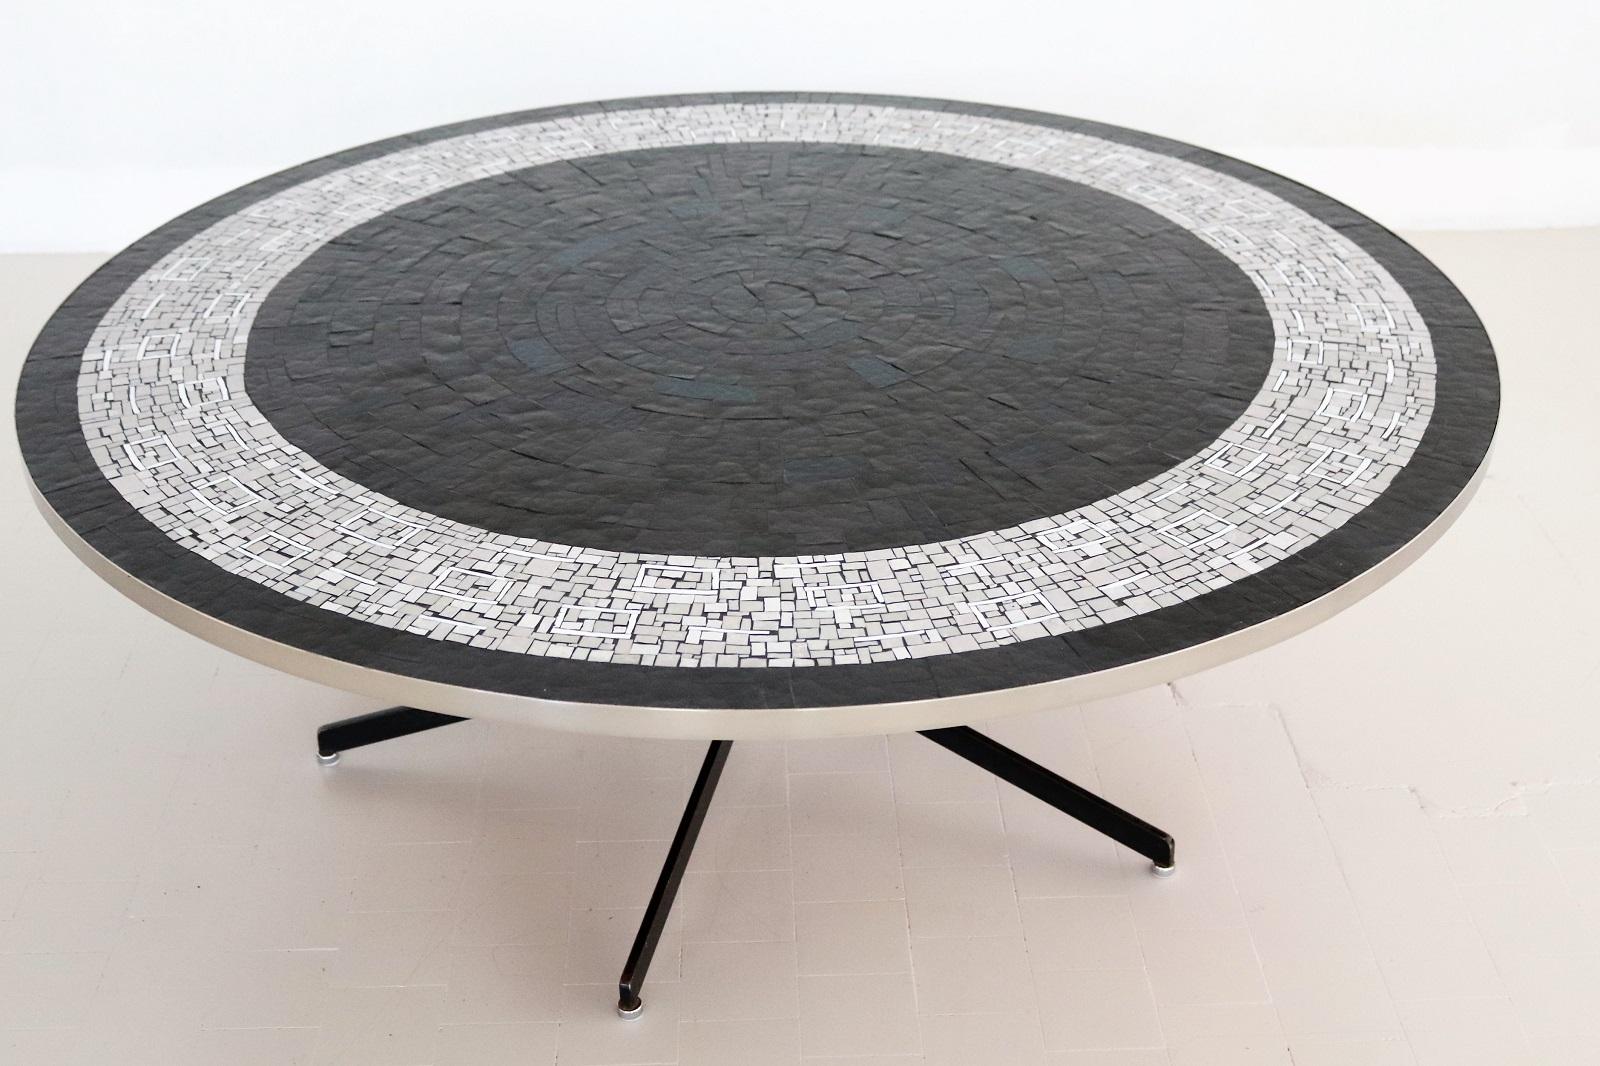 Midcentury Mosaic Tile and Chrome Coffee Table by Berthold Muller, 1960s For Sale 5